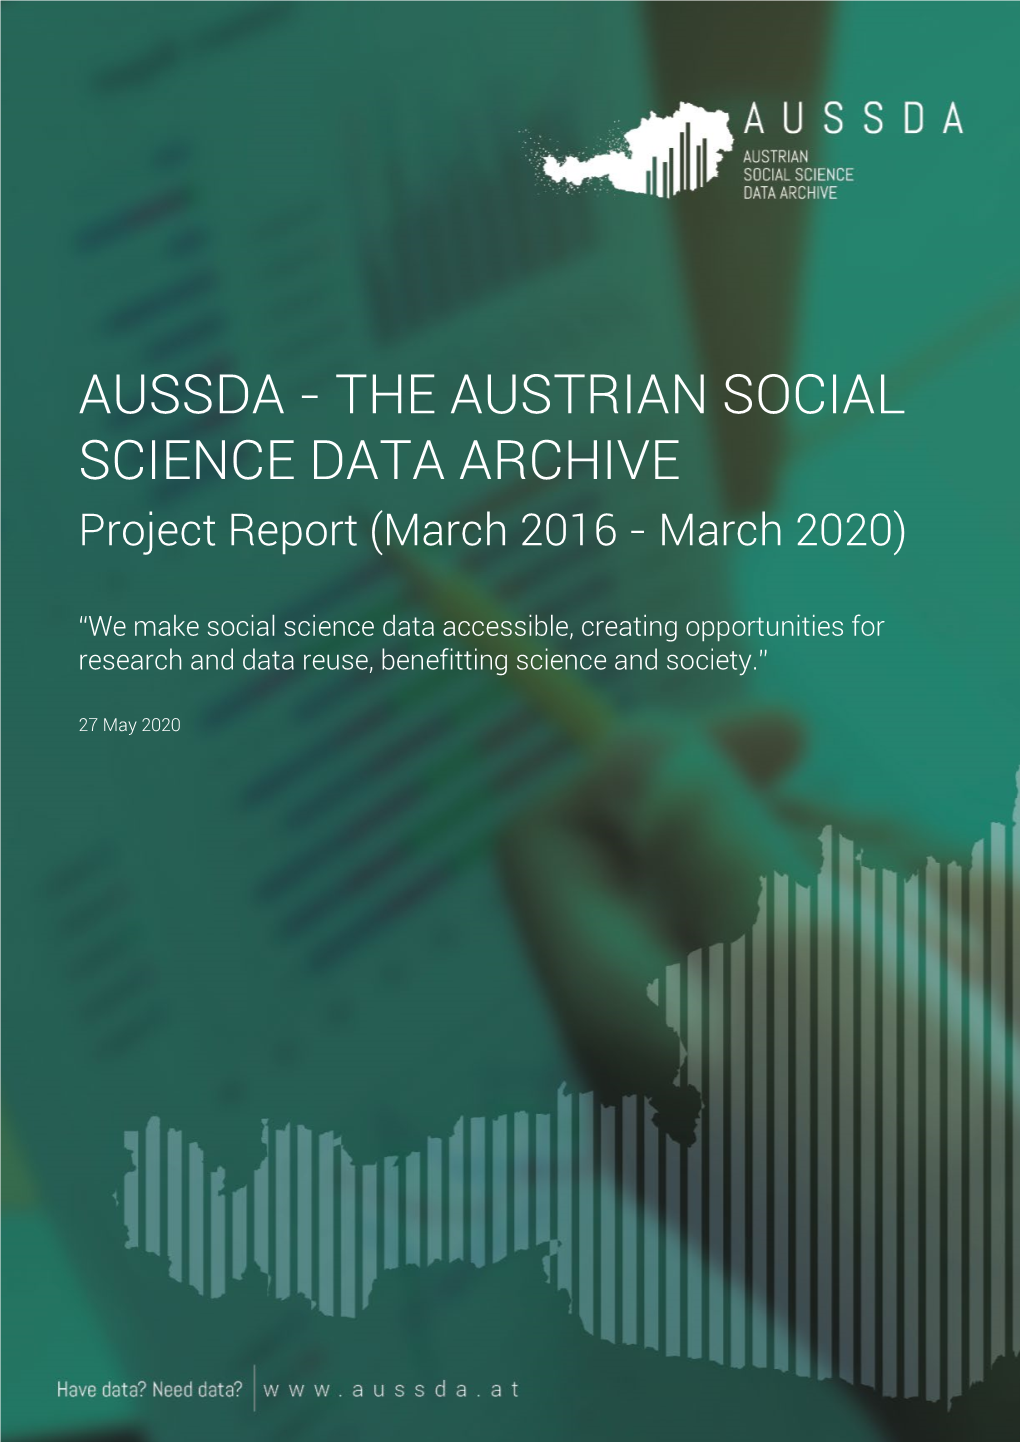 The Austrian Social Science Data Archive AUSSDA Is a Core Social Science Research Infrastructure in Austria Offering Research Data and Archiving Services